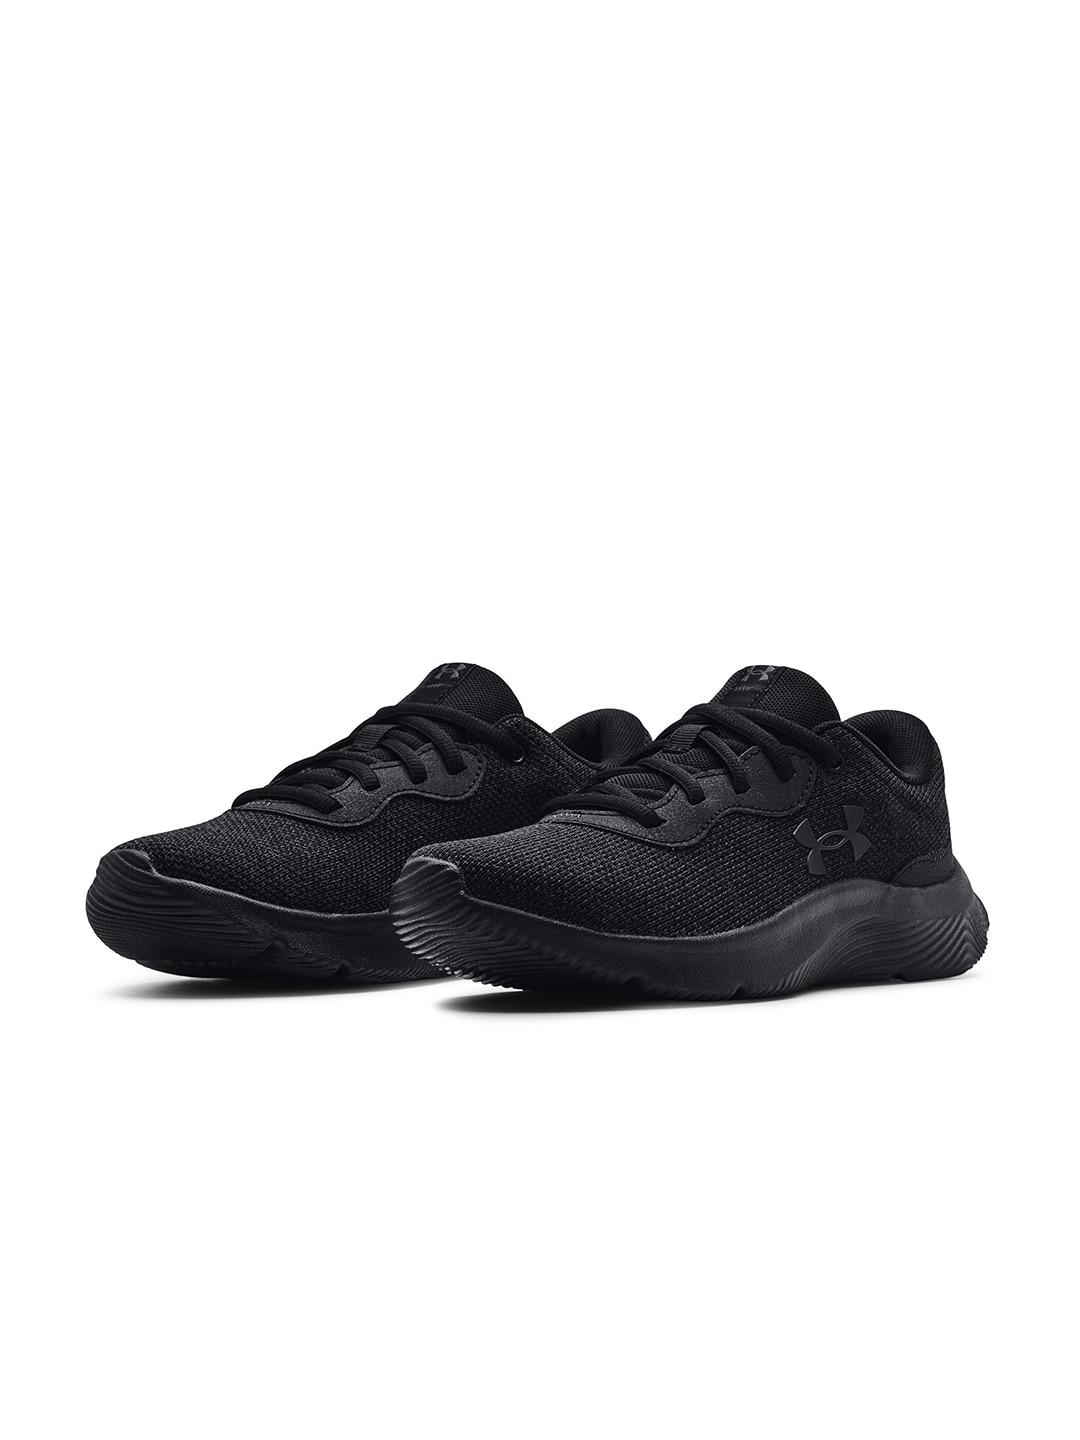 UNDER ARMOUR Women Black Mojo 2 Running Shoes Price in India